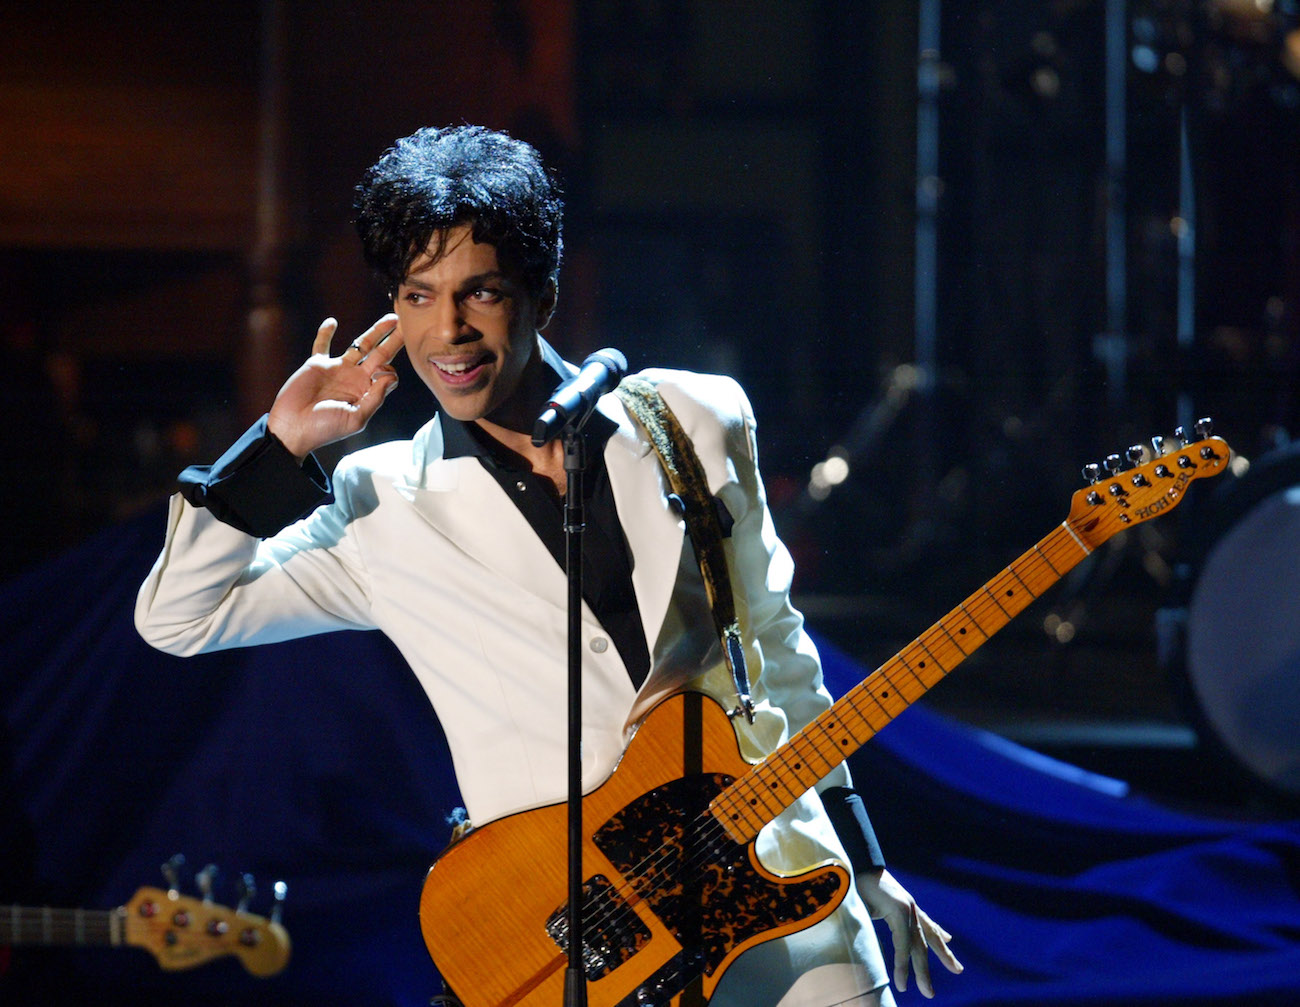 Prince performing during his Rock & Roll Hall of Fame induction in 2004.